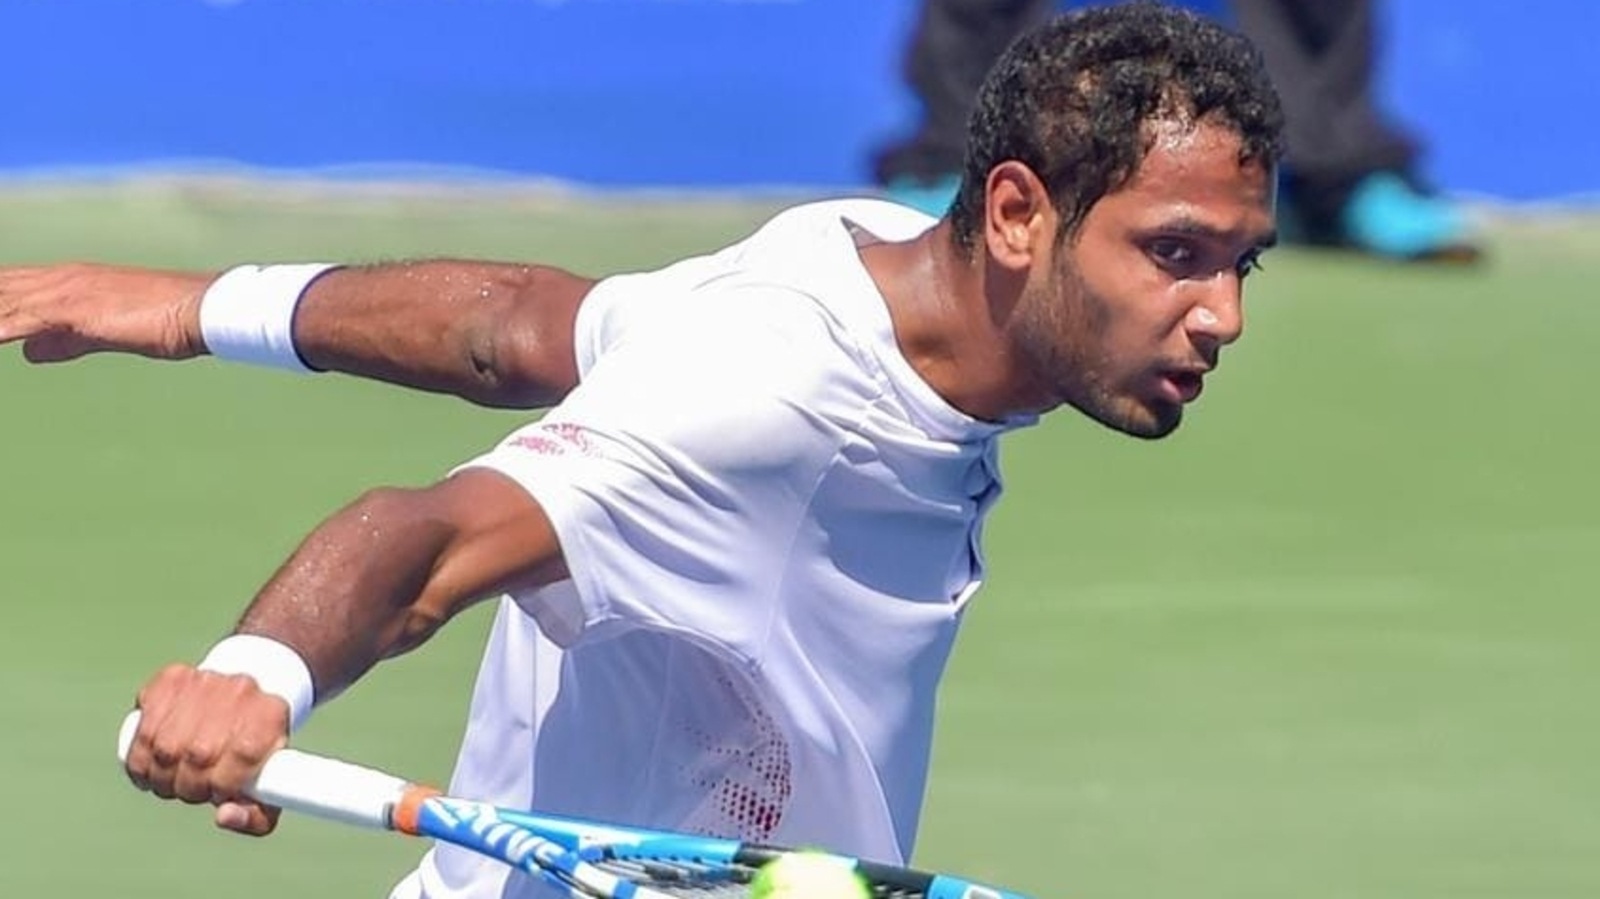 ramkumar-loses-indian-team-stares-at-defeat-in-davis-cup-tie-against-norway